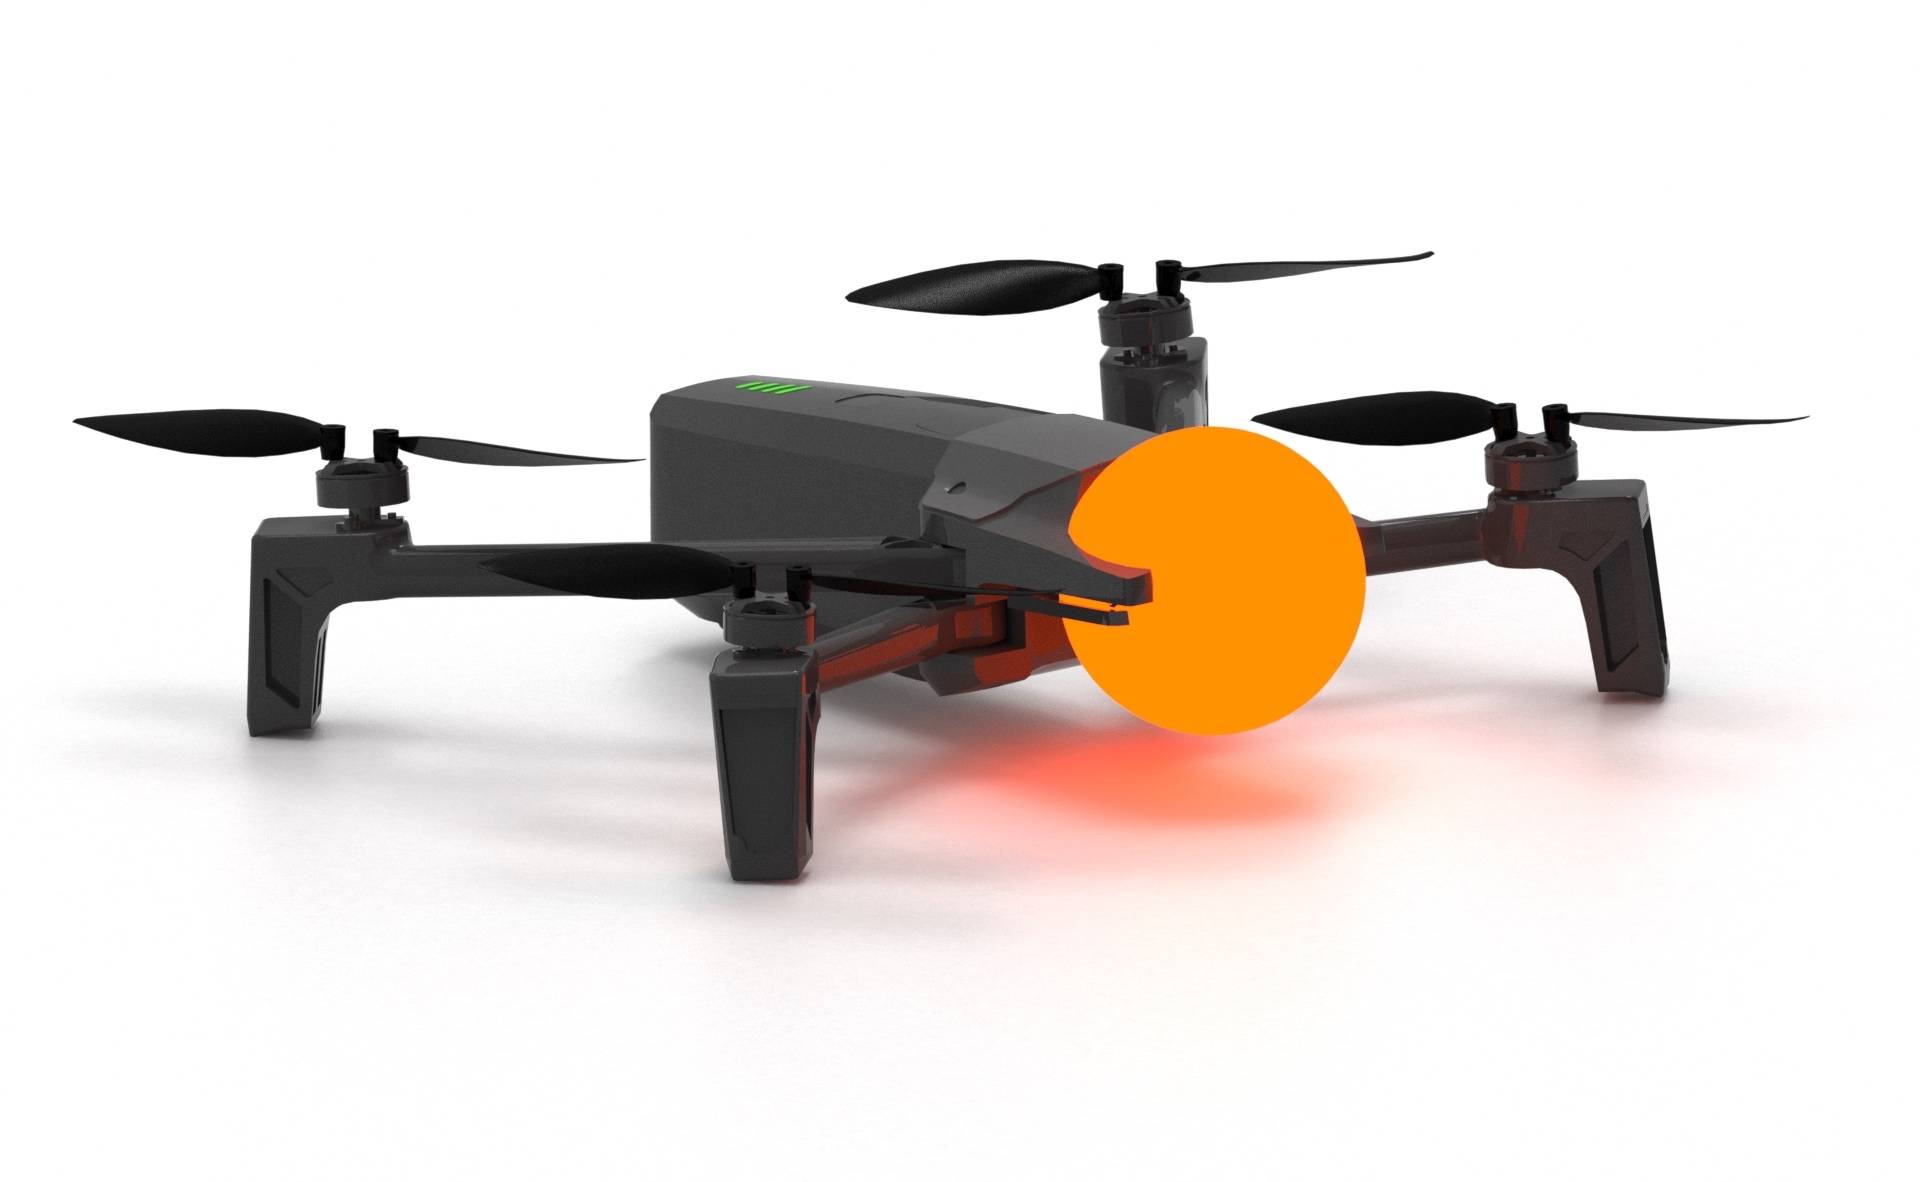 Parrot + Dronisos: Imagining the future of Drone Automation - Parrot